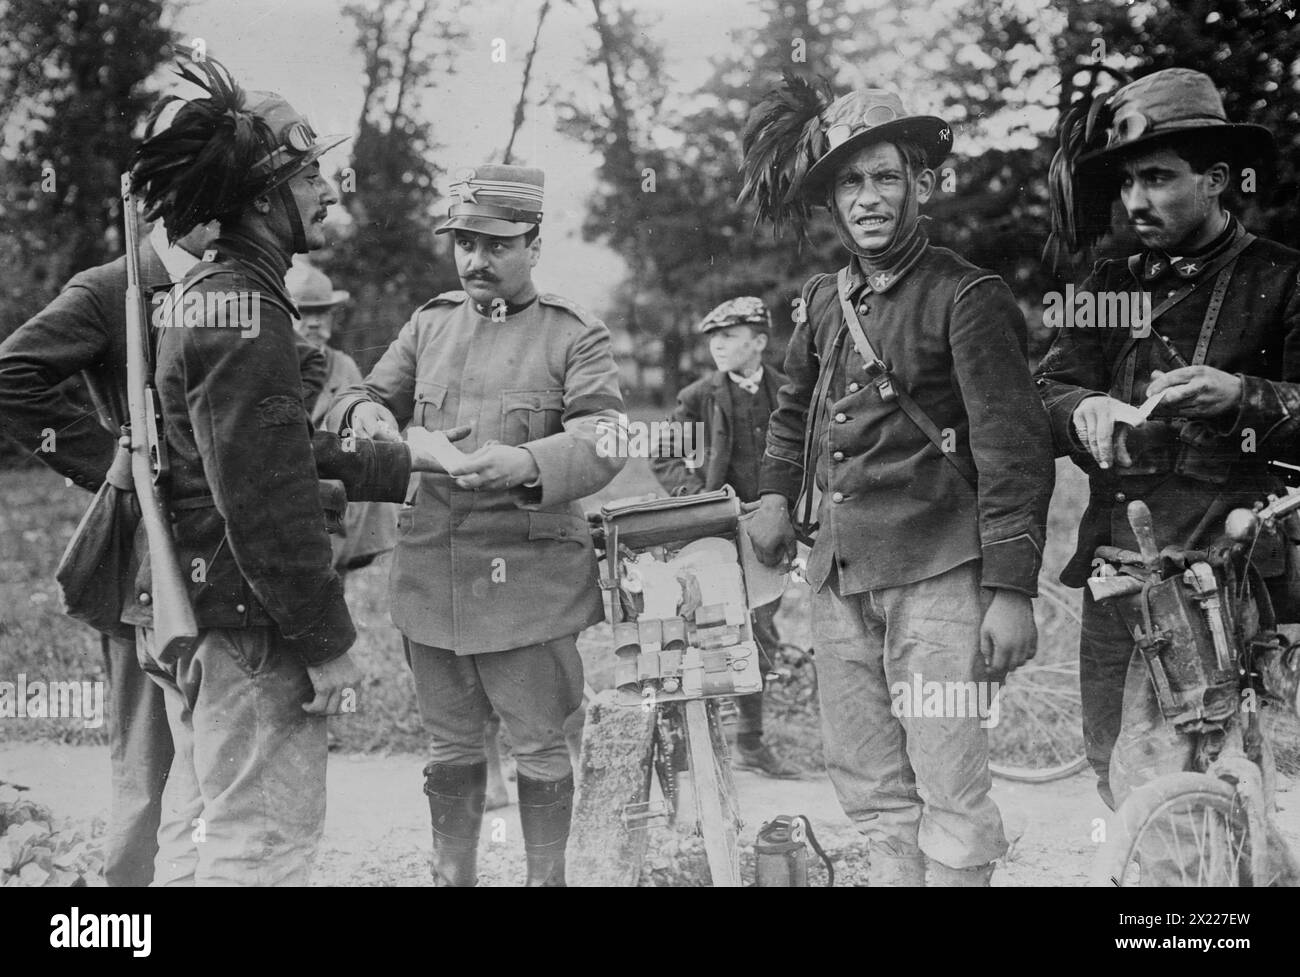 Surgeon treating wounded, Tripoly i.e., Tripoli, between c1910 and c1915. Shows Italian surgeon with wounded soldiers at Tripoli, Libya during the Turco-Italian War (Italo-Turkish War) which took place between September 1911 and October 1912. Stock Photo